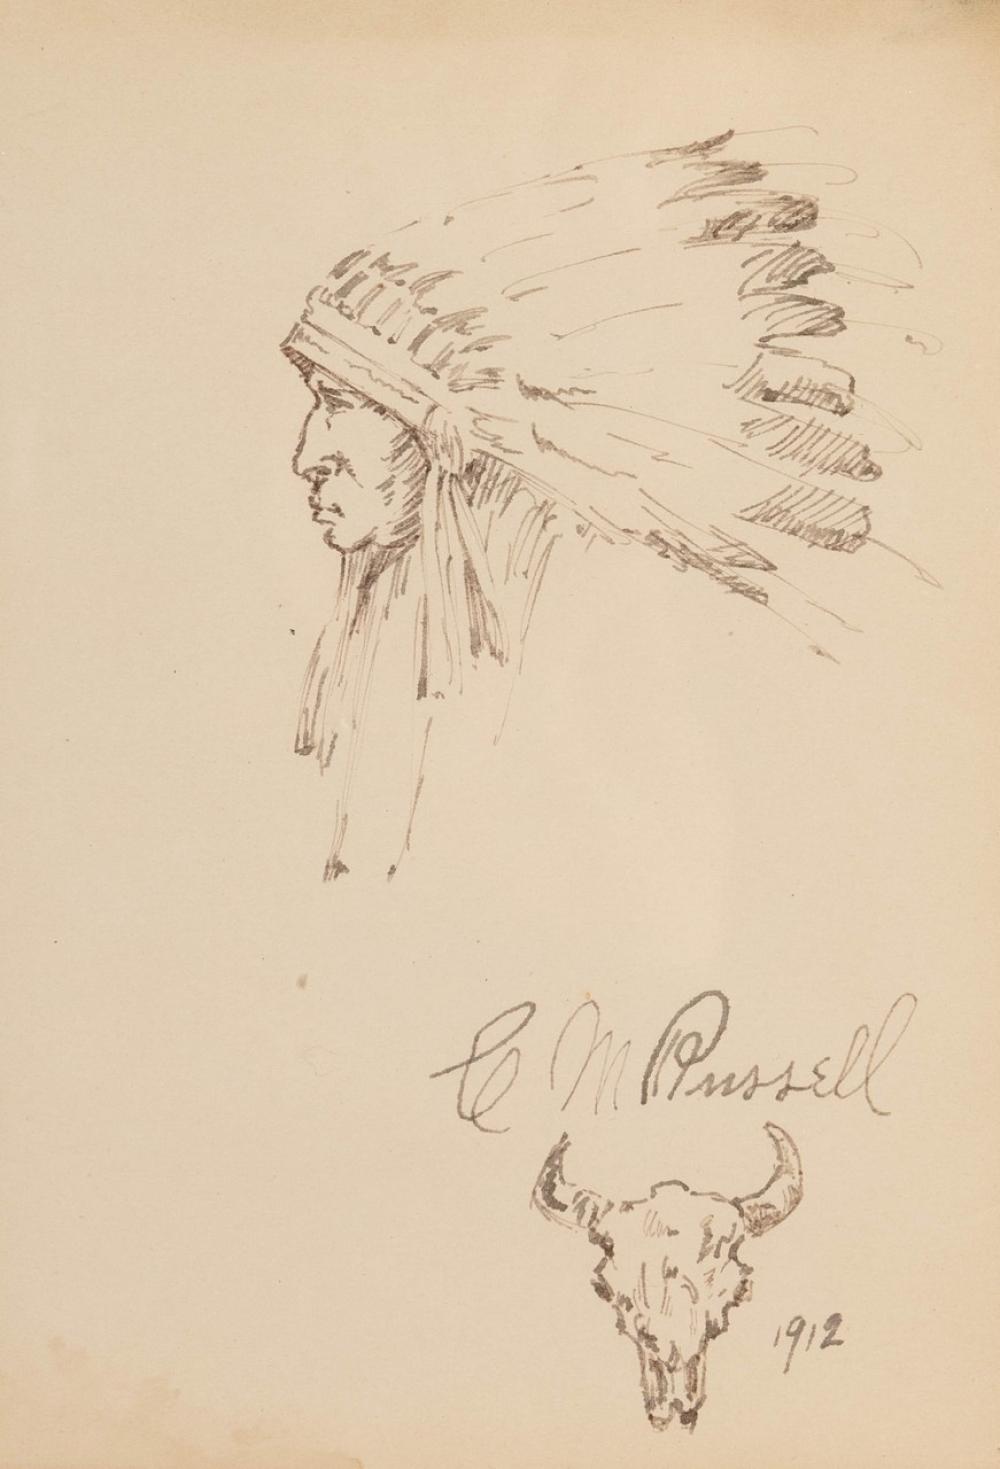 Charles Marion Russell - Indian Chief 1912 7.25" x 5"